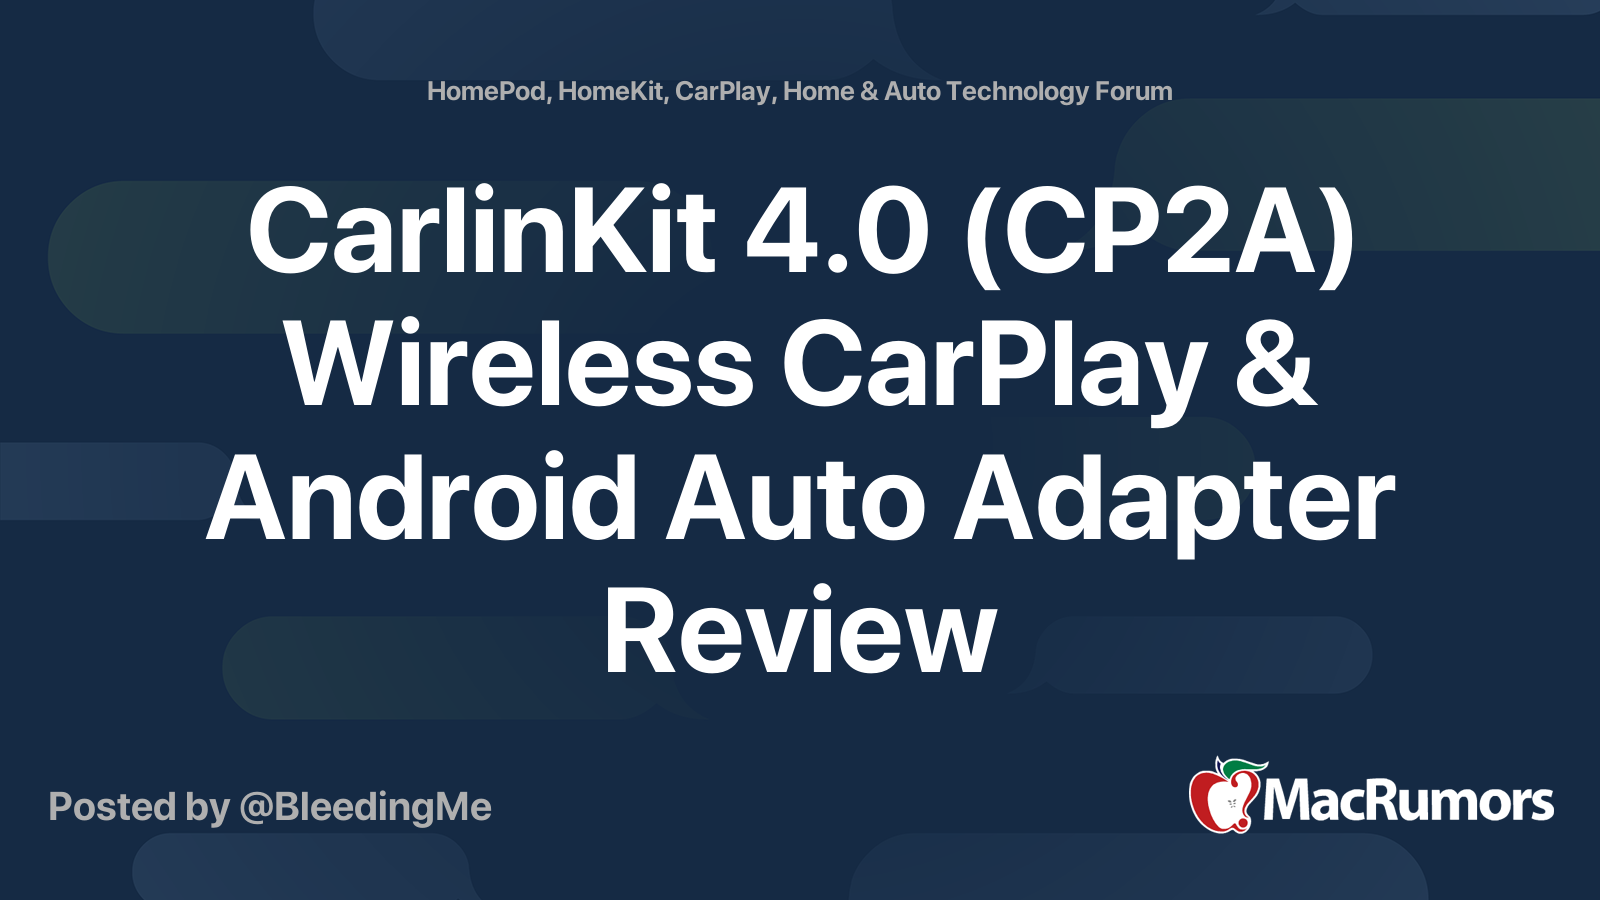 CarlinKit 4.0 (CP2A) Wireless CarPlay & Android Auto Adapter Review